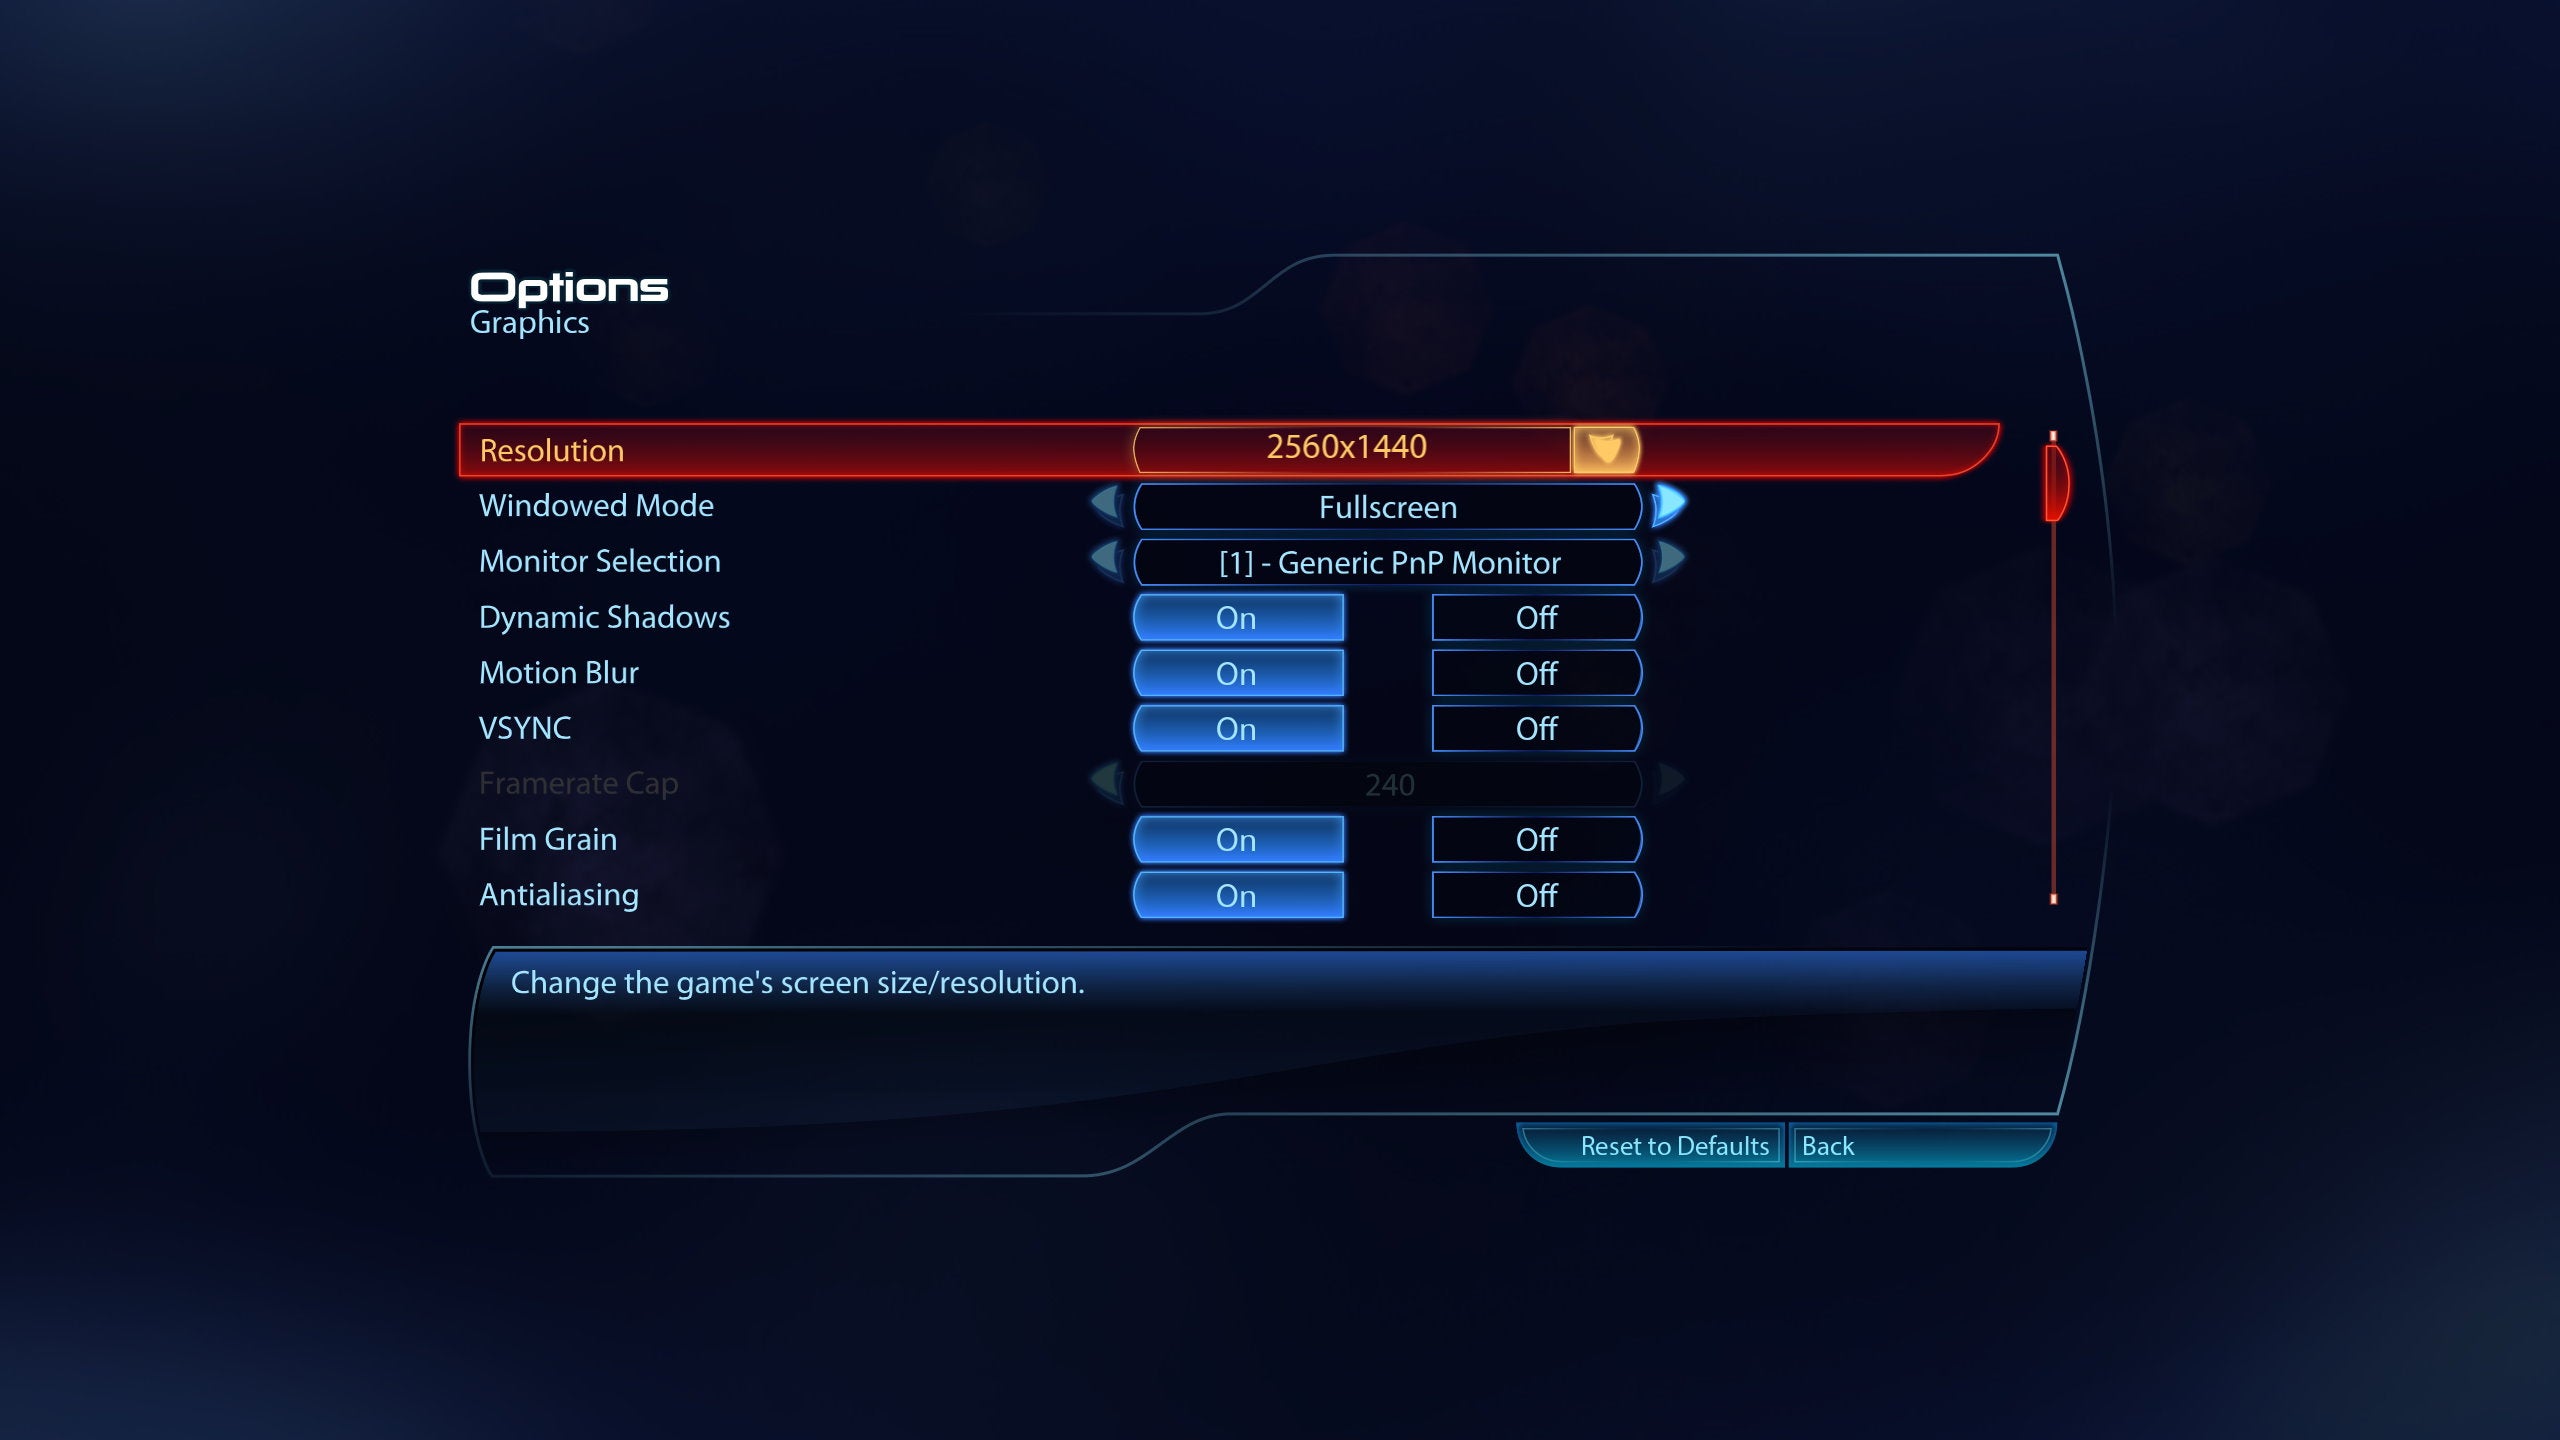 The PC settings menu for Mass Effect 3 in Mass Effect Legendary Edition